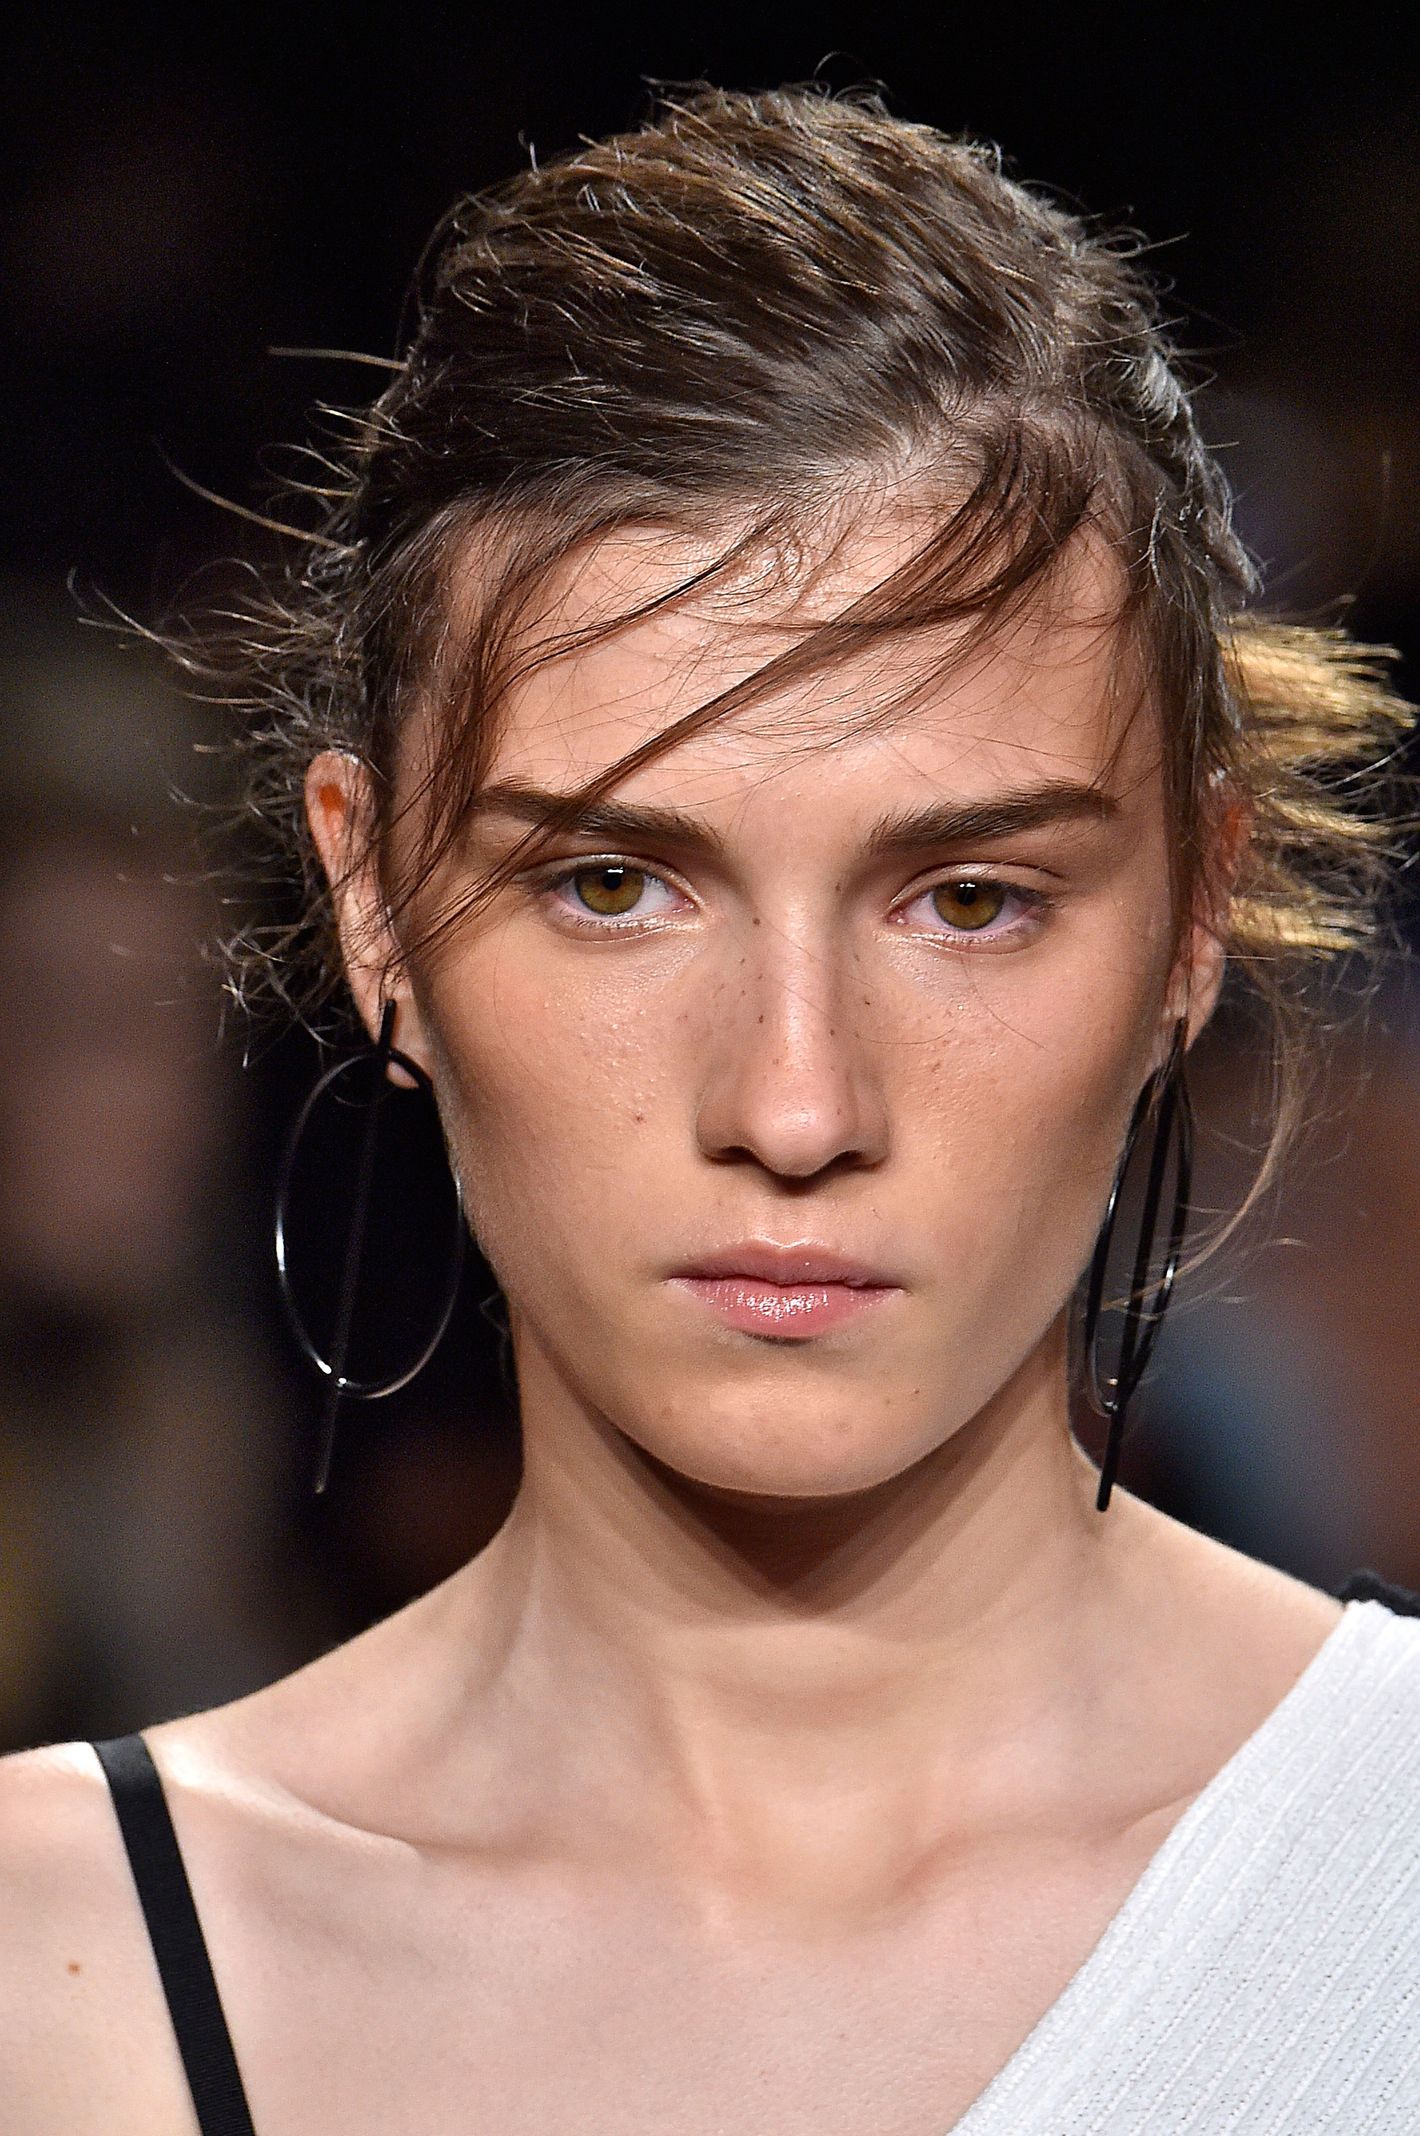 6 New, Easy Backstage Beauty Lessons From Fashion Week